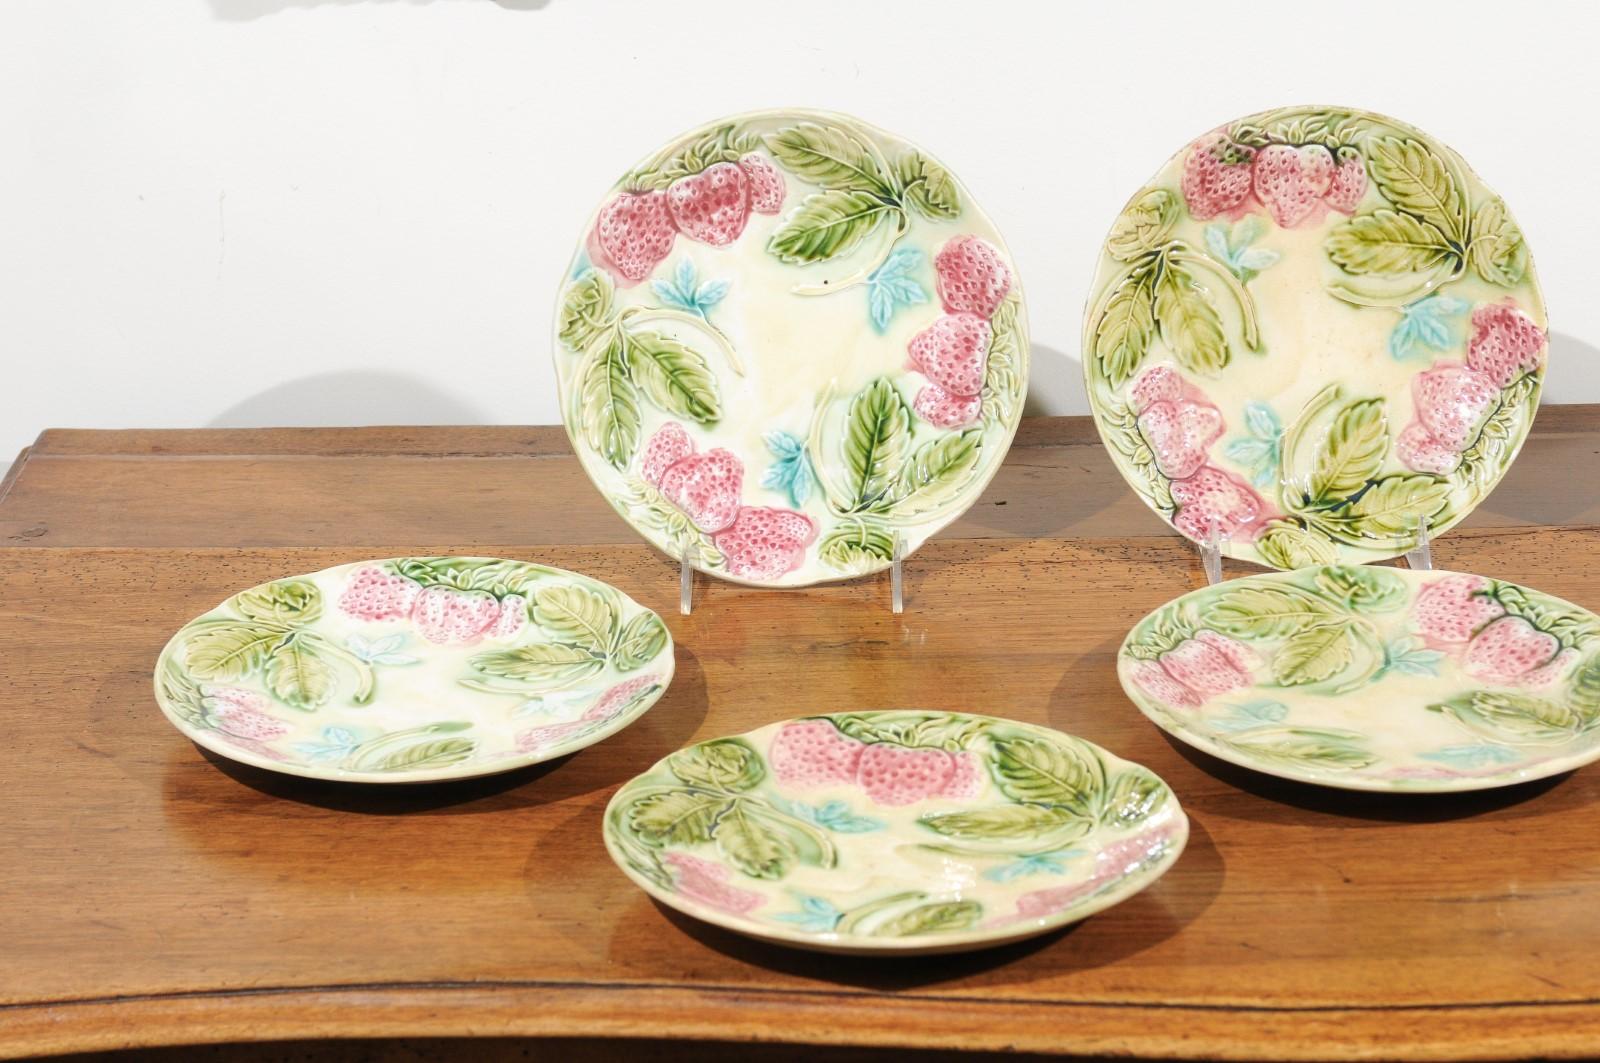 French 19th Century Majolica Plates with Raised Decor of Strawberries and Leaves For Sale 1